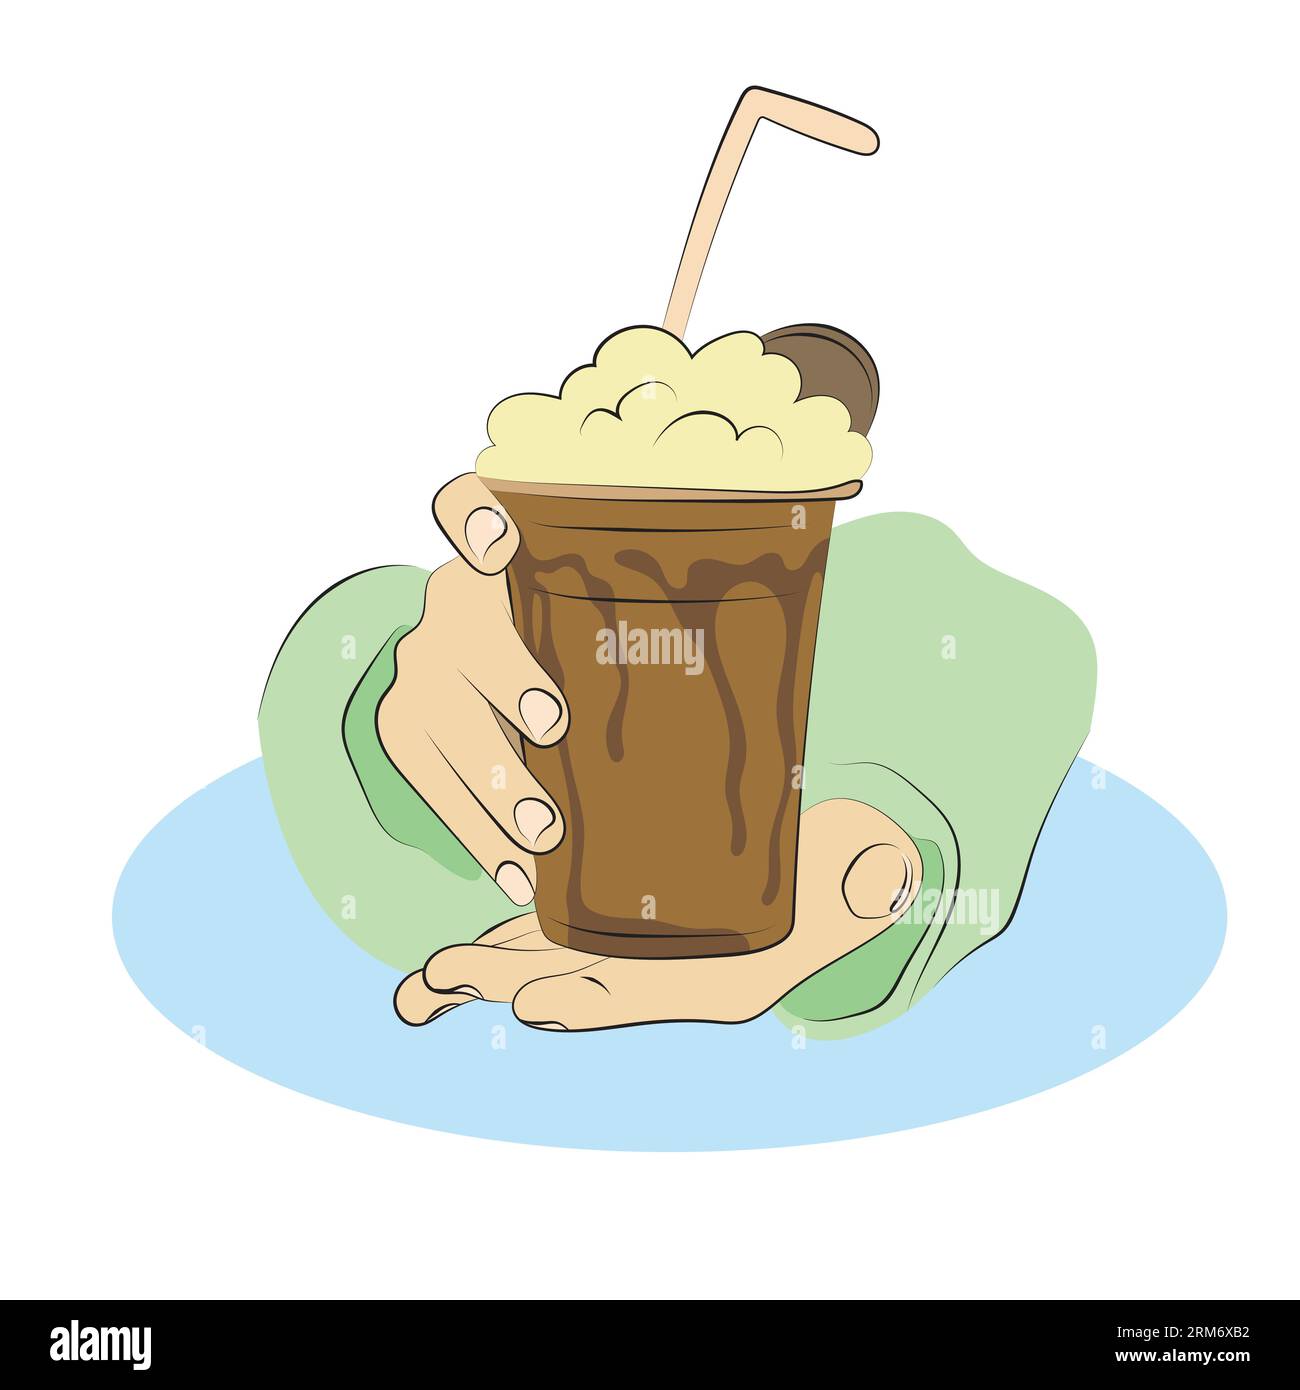 closeup hands holding iced coffee or latte in takeaway plastic cup with whipping cream illustration vector hand drawn isolated on white background Stock Vector